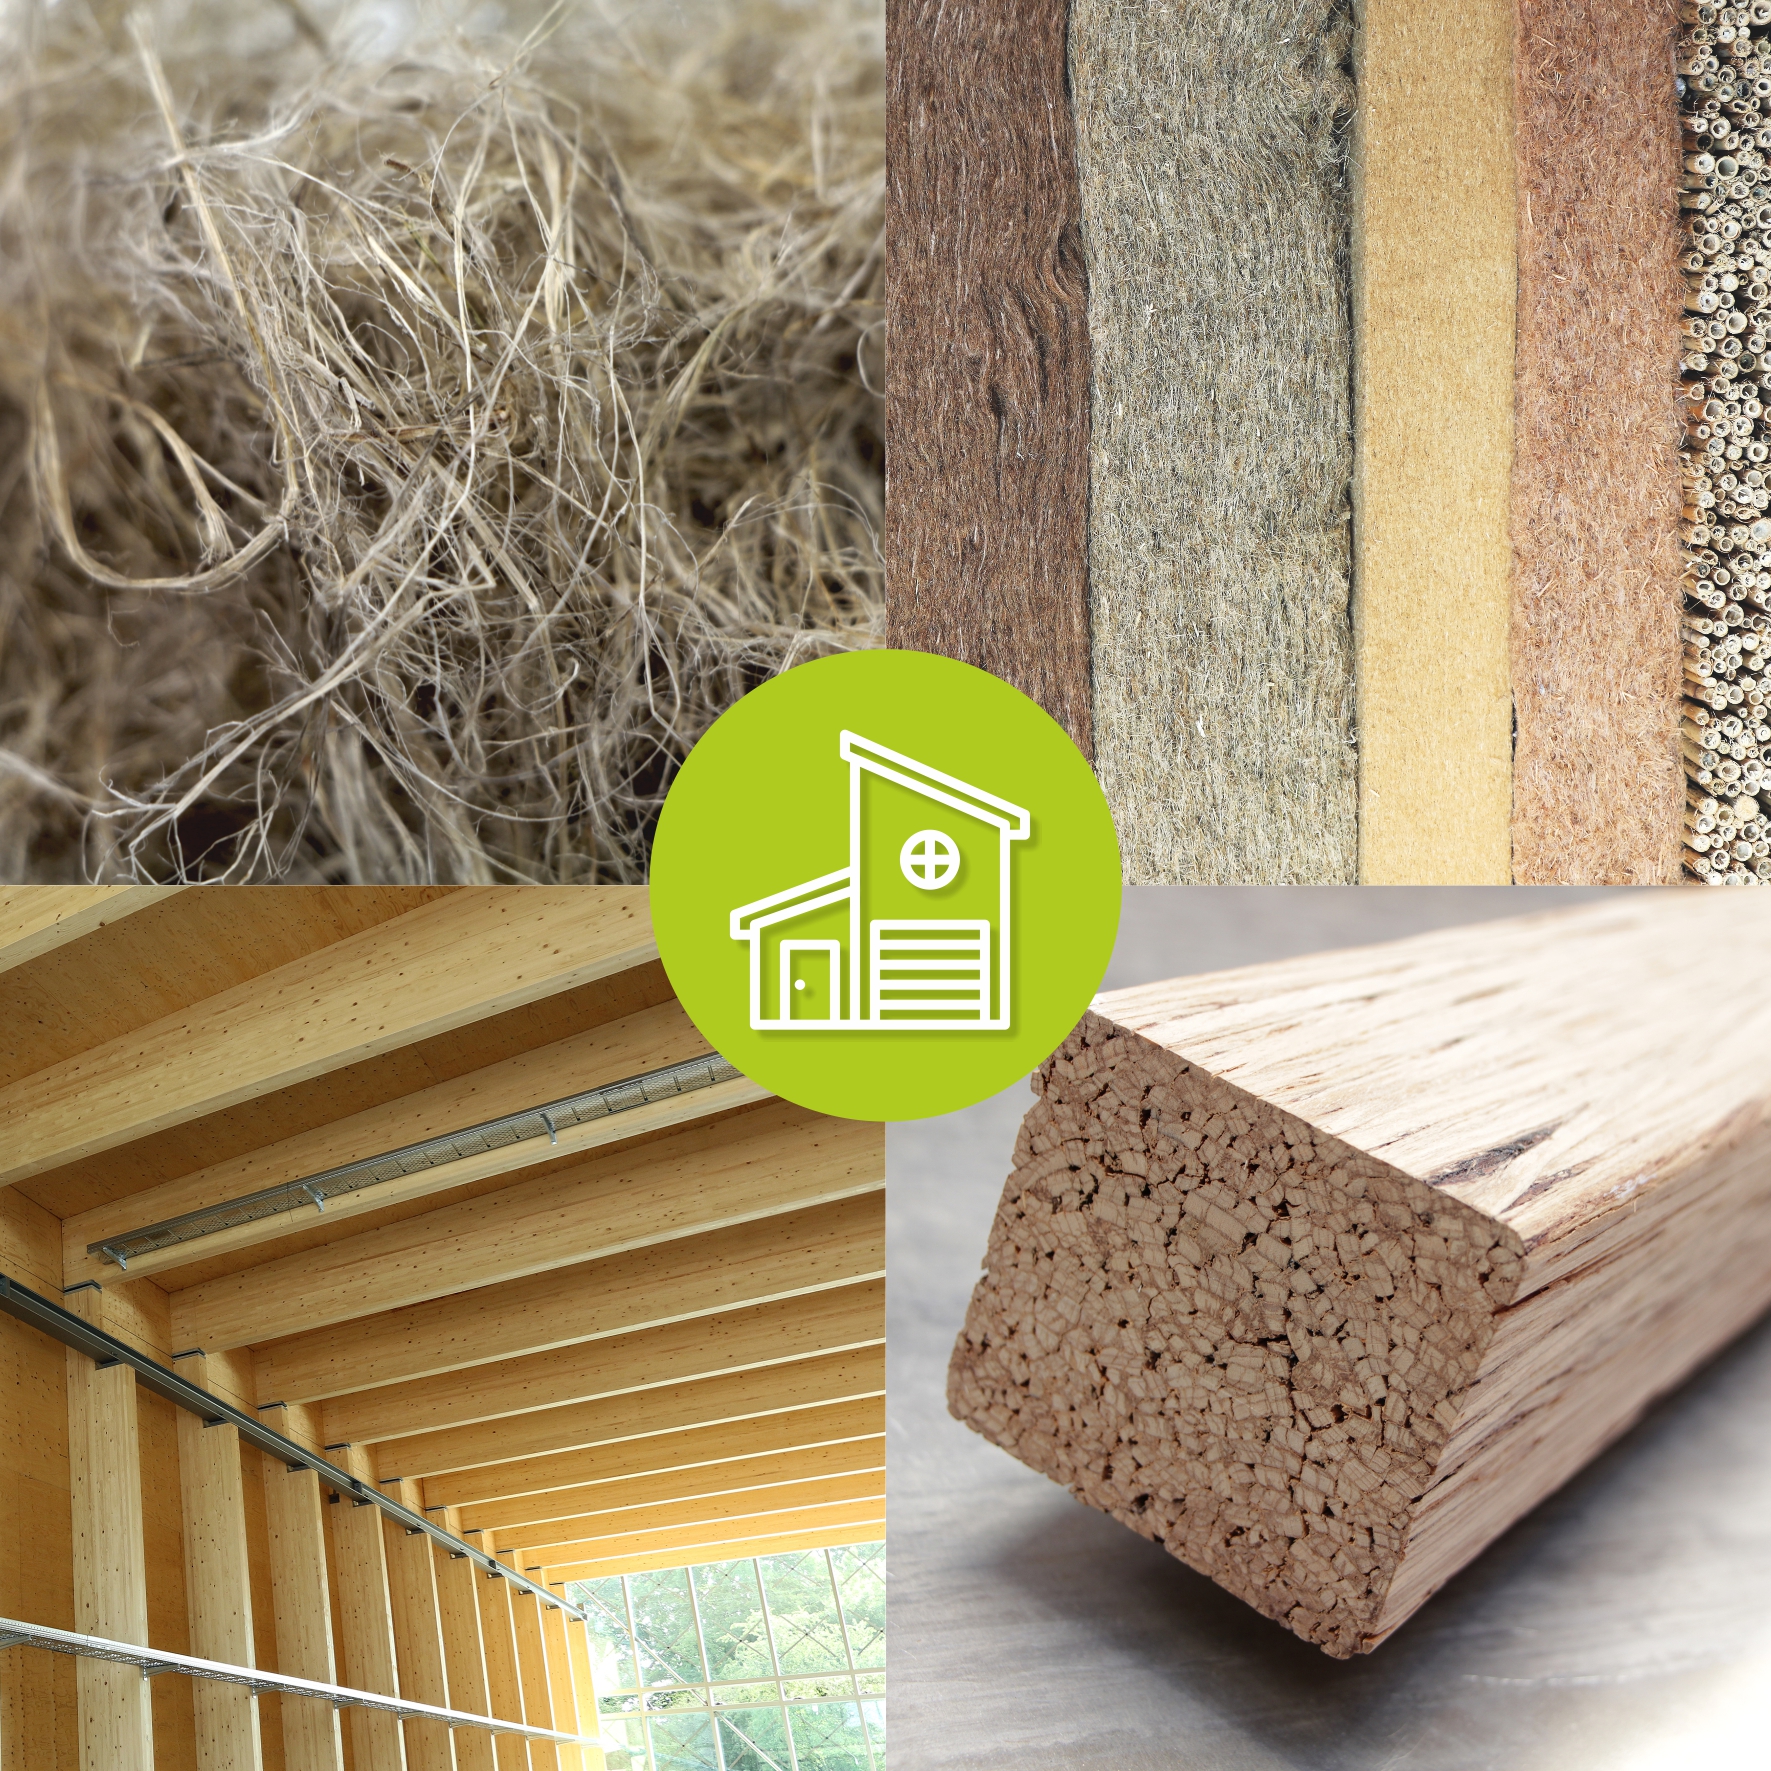 The image shows, clockwise from top left: hemp fibers, insulation mats, square timber, and an interior room constructed from wood. In the center is a graphic representation of a house.